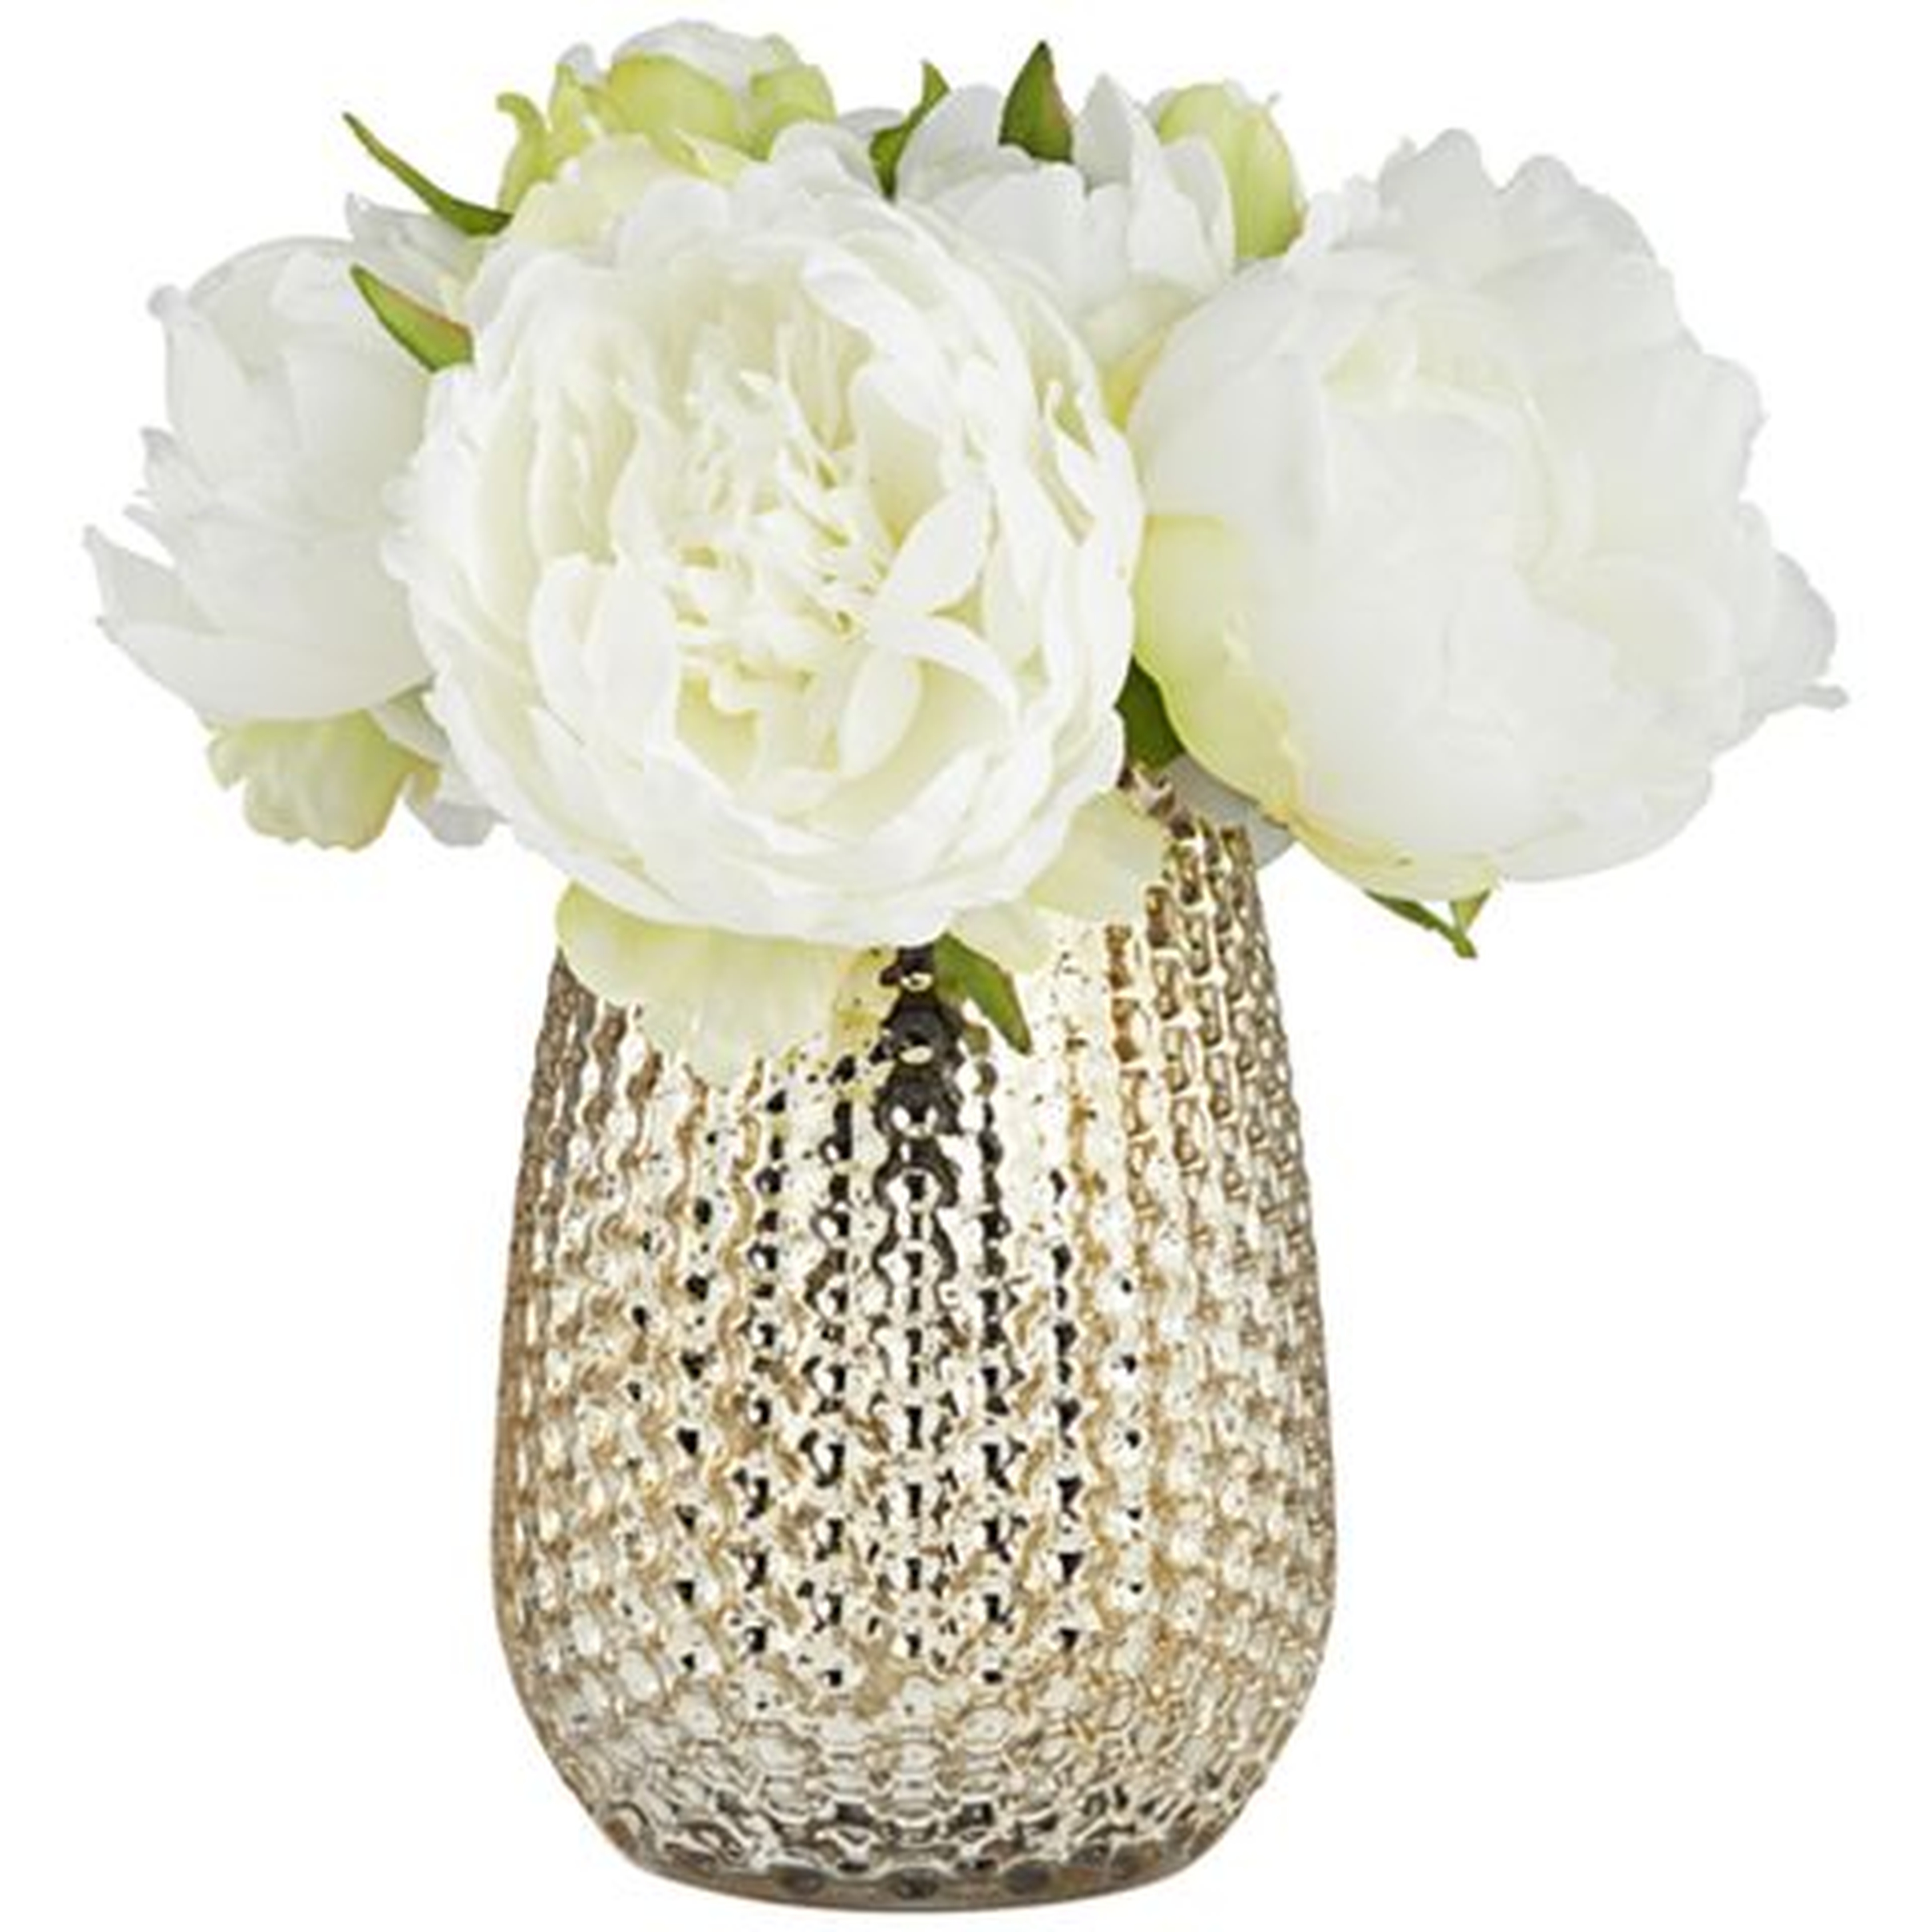 White Peony 8"H Faux Flowers in a Mercury Glass Vase - Lamps Plus